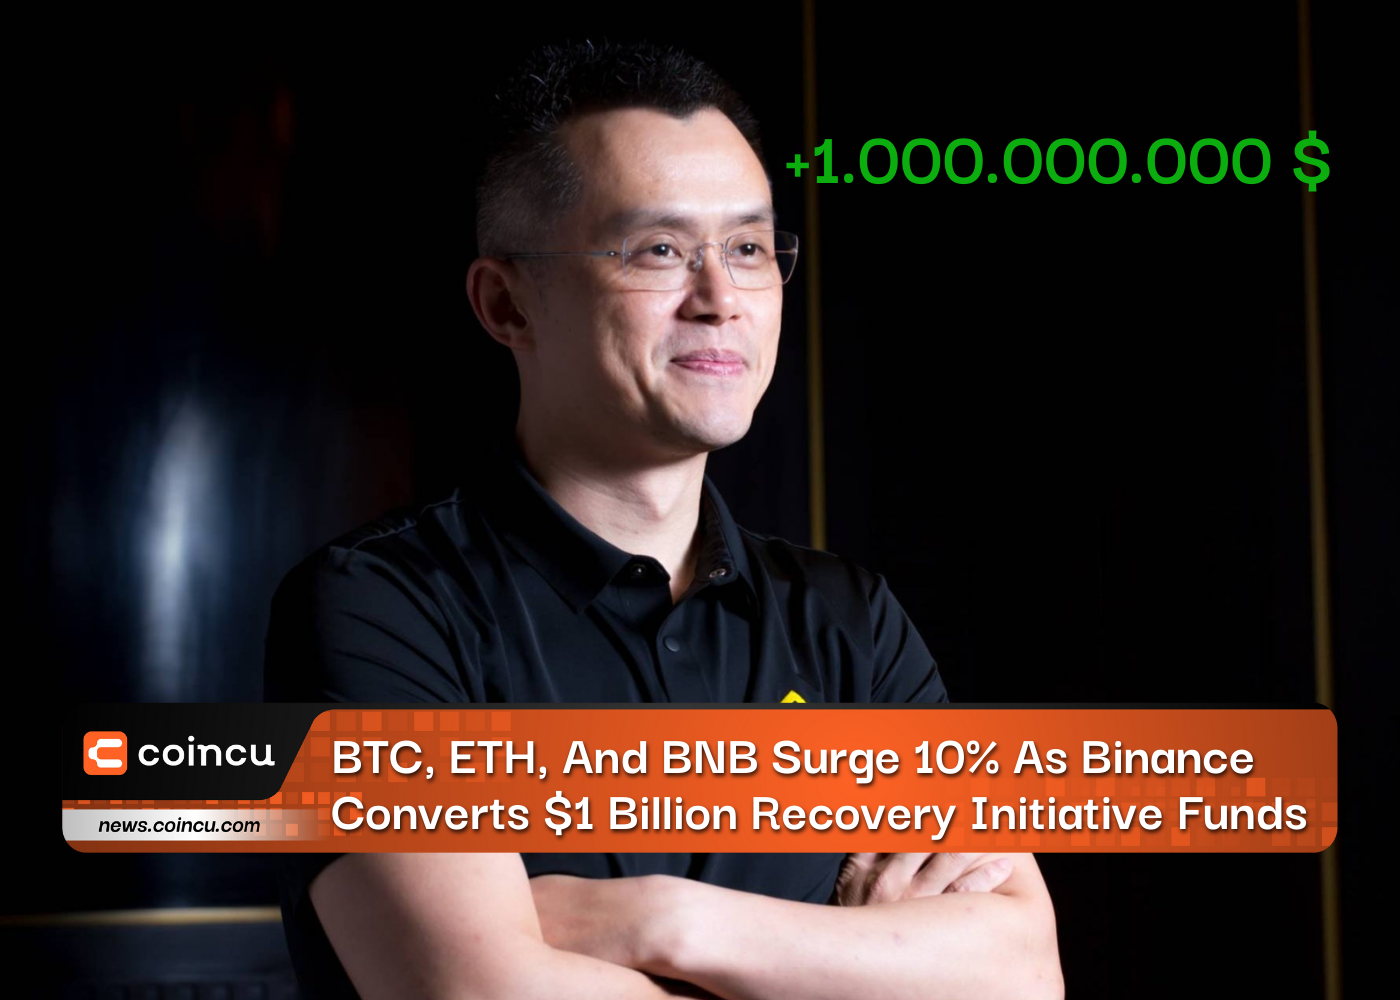 BTC, ETH, And BNB Surge 10% As Binance Converts $1 Billion Recovery Initiative Funds